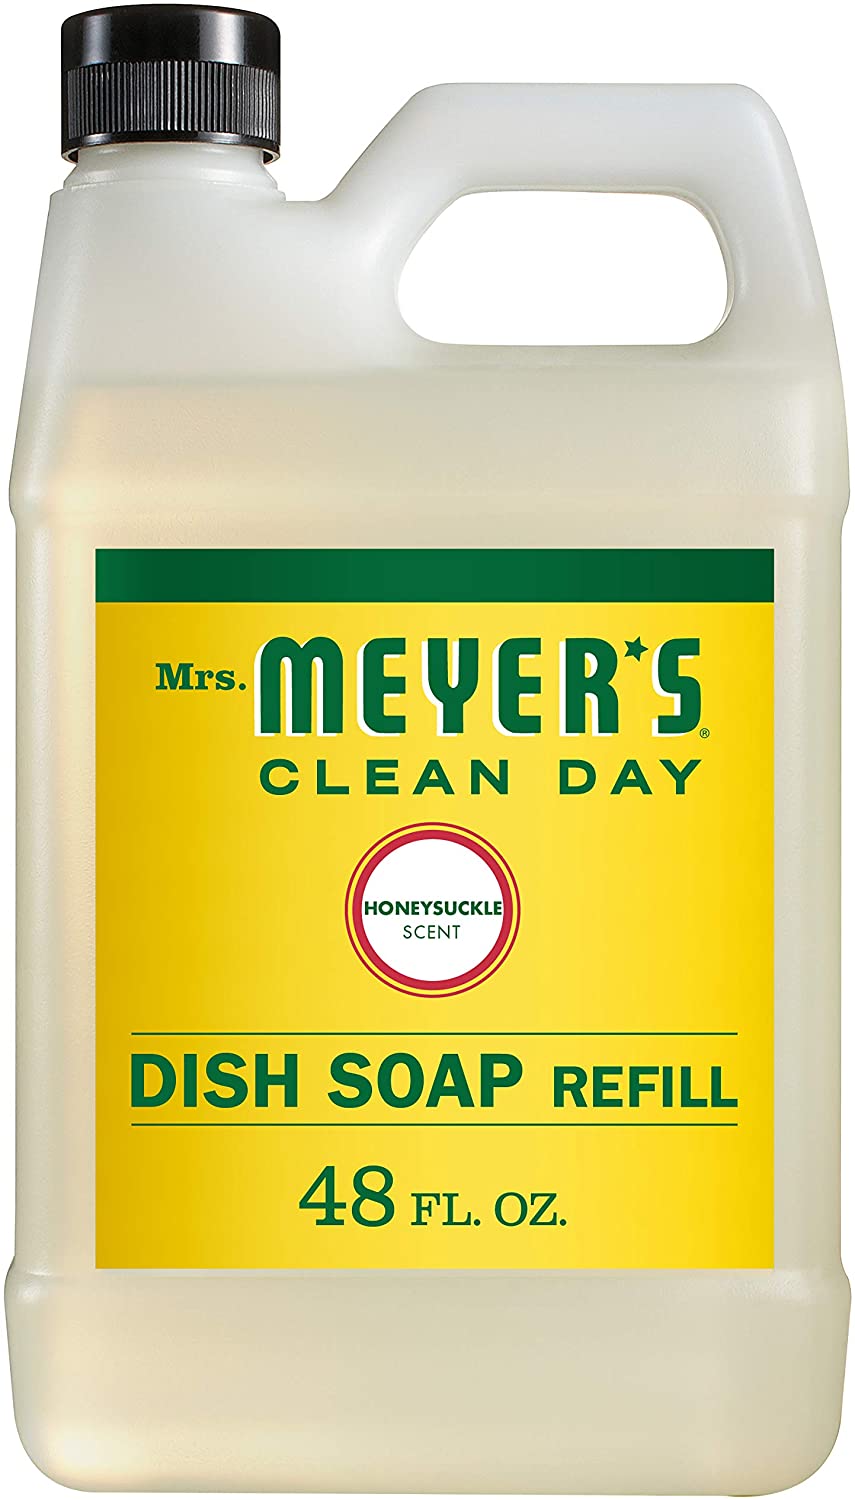 48-Oz Mrs. Meyer's Clean Day Dishwashing Liquid Dish Soap Refill (Honeysuckle) $7.60 + Free Shipping w/ Prime or on $25+